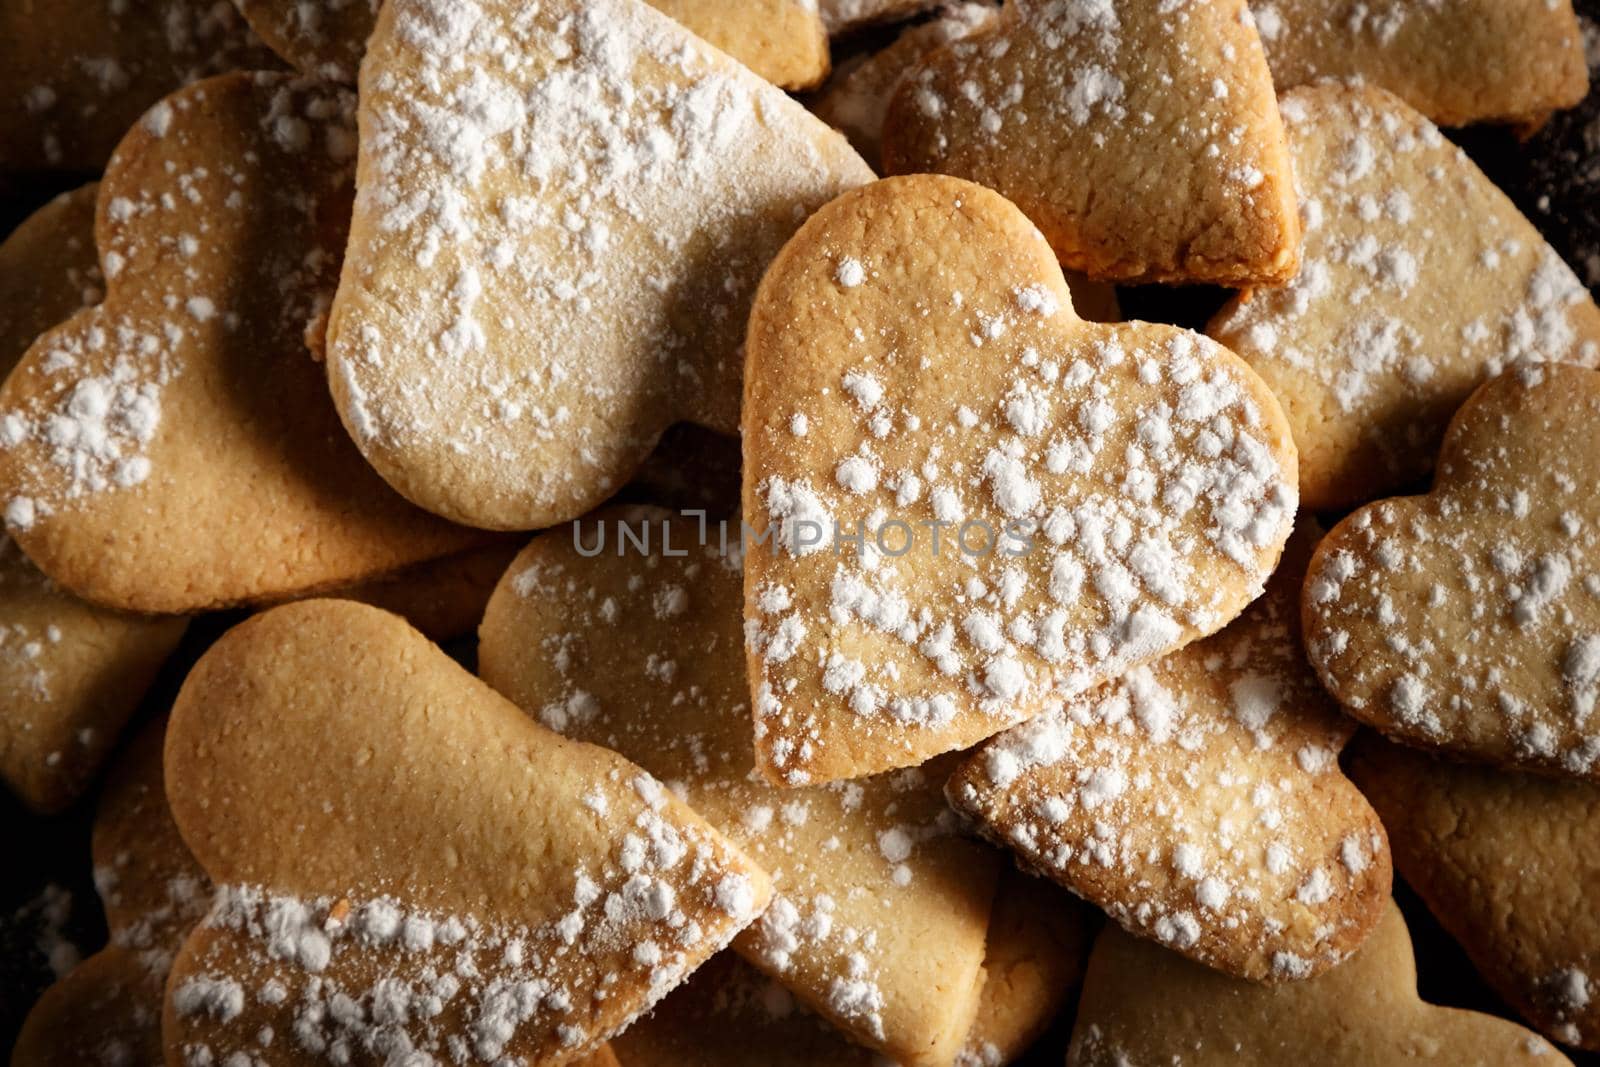 Delicious home-made heart-shaped cookies sprinkled with icing sugar on sackcloth and wooden boards. Horizontal image seen from above.